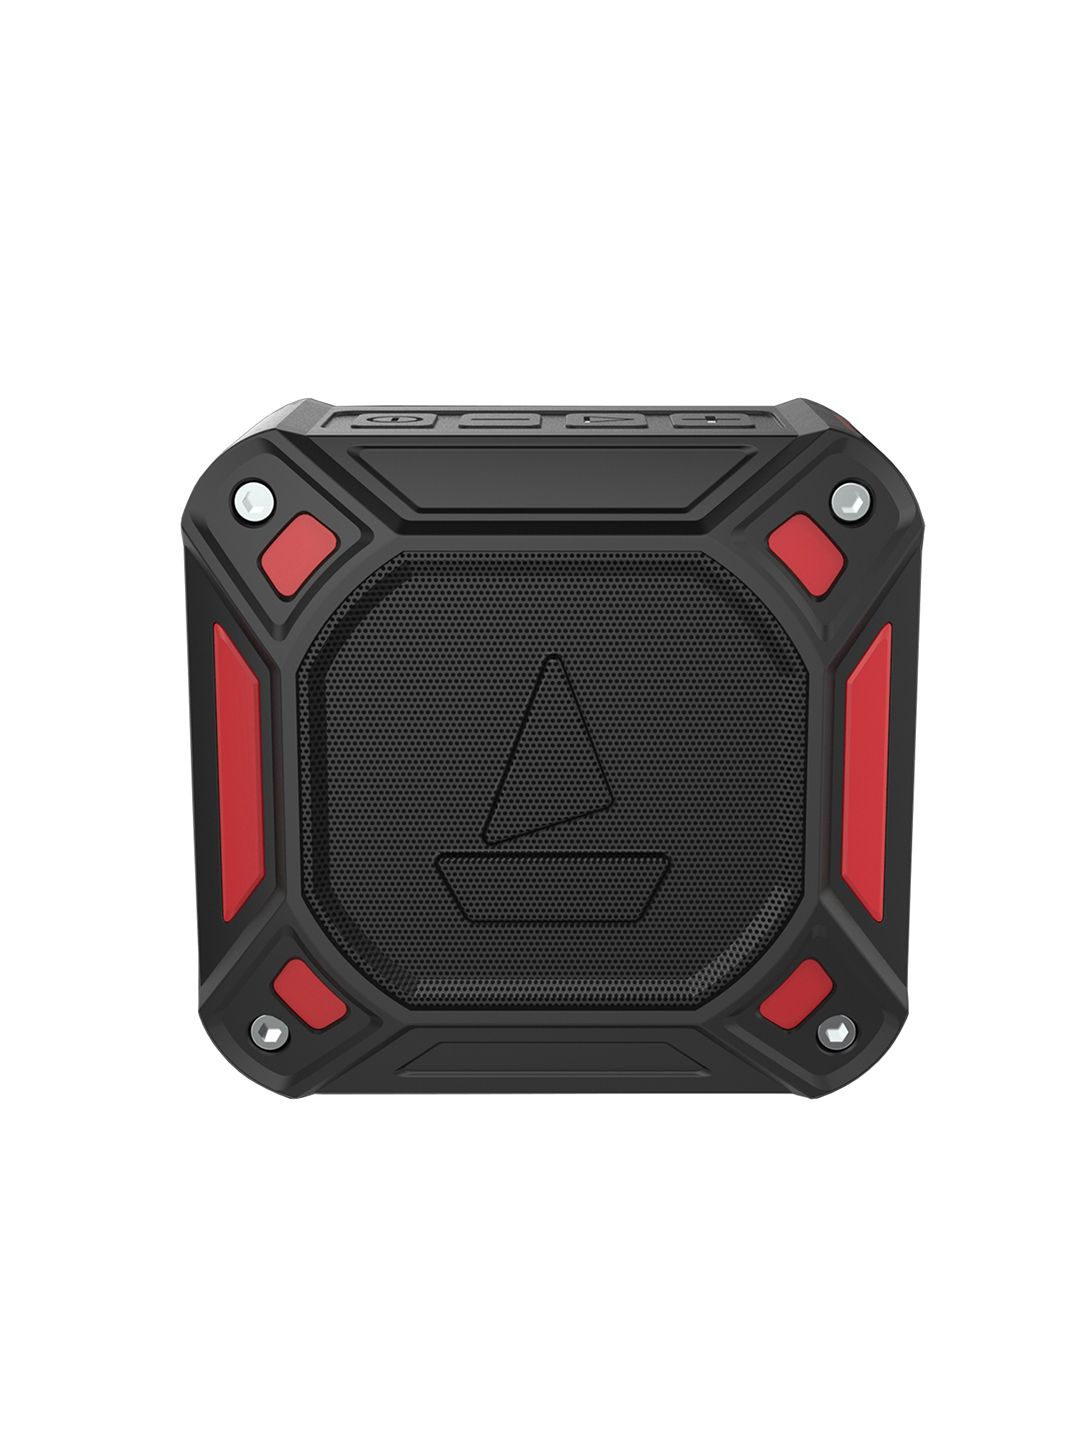 boAt Stone 300 5W Red Portable Wireless Speaker with IPX7 Mountable Design & Bt V5.0 Price in India